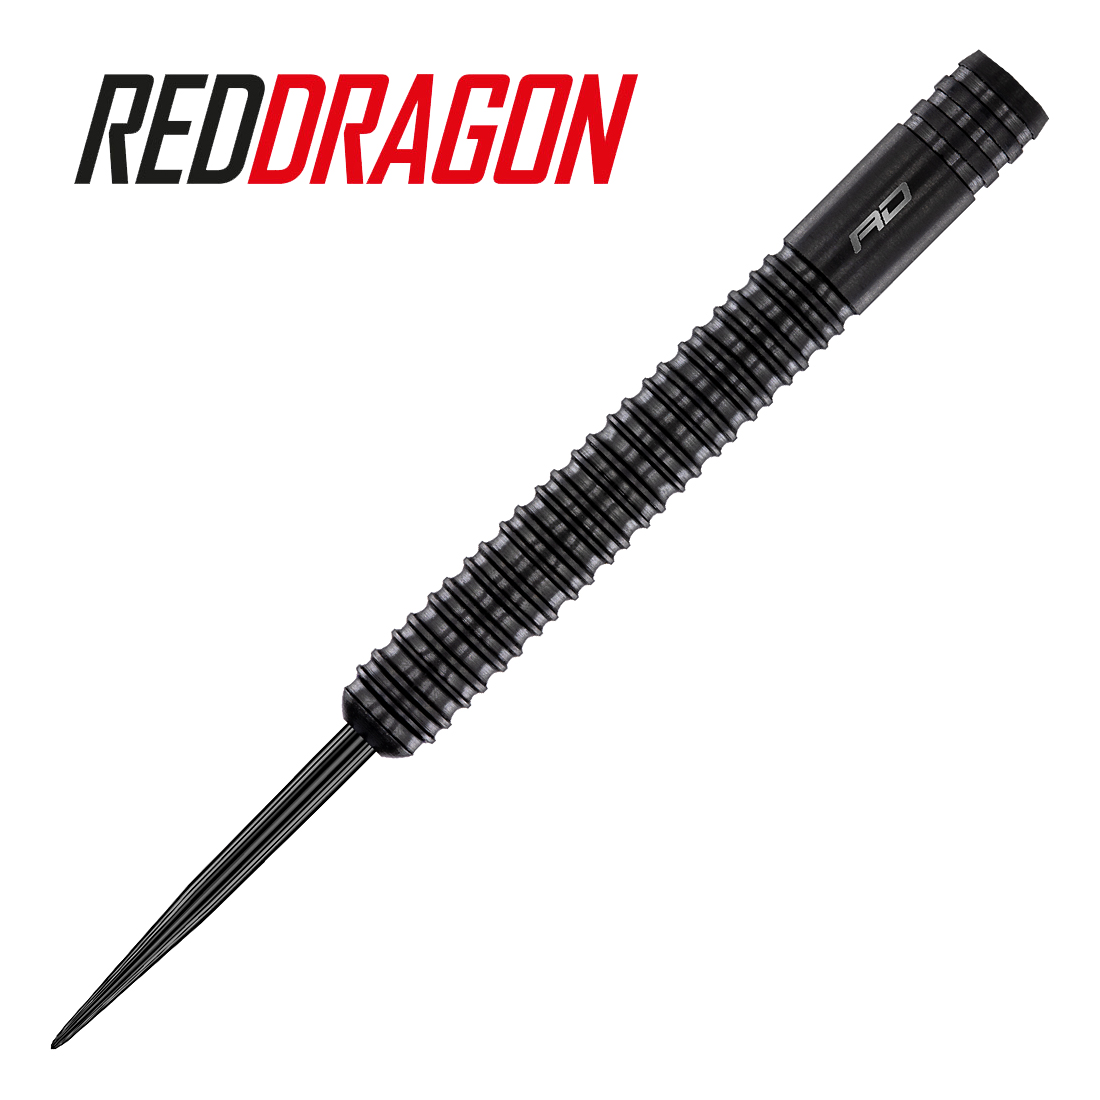 Review of Red Dragon Jamie Hughes 24g Steel Tip Darts